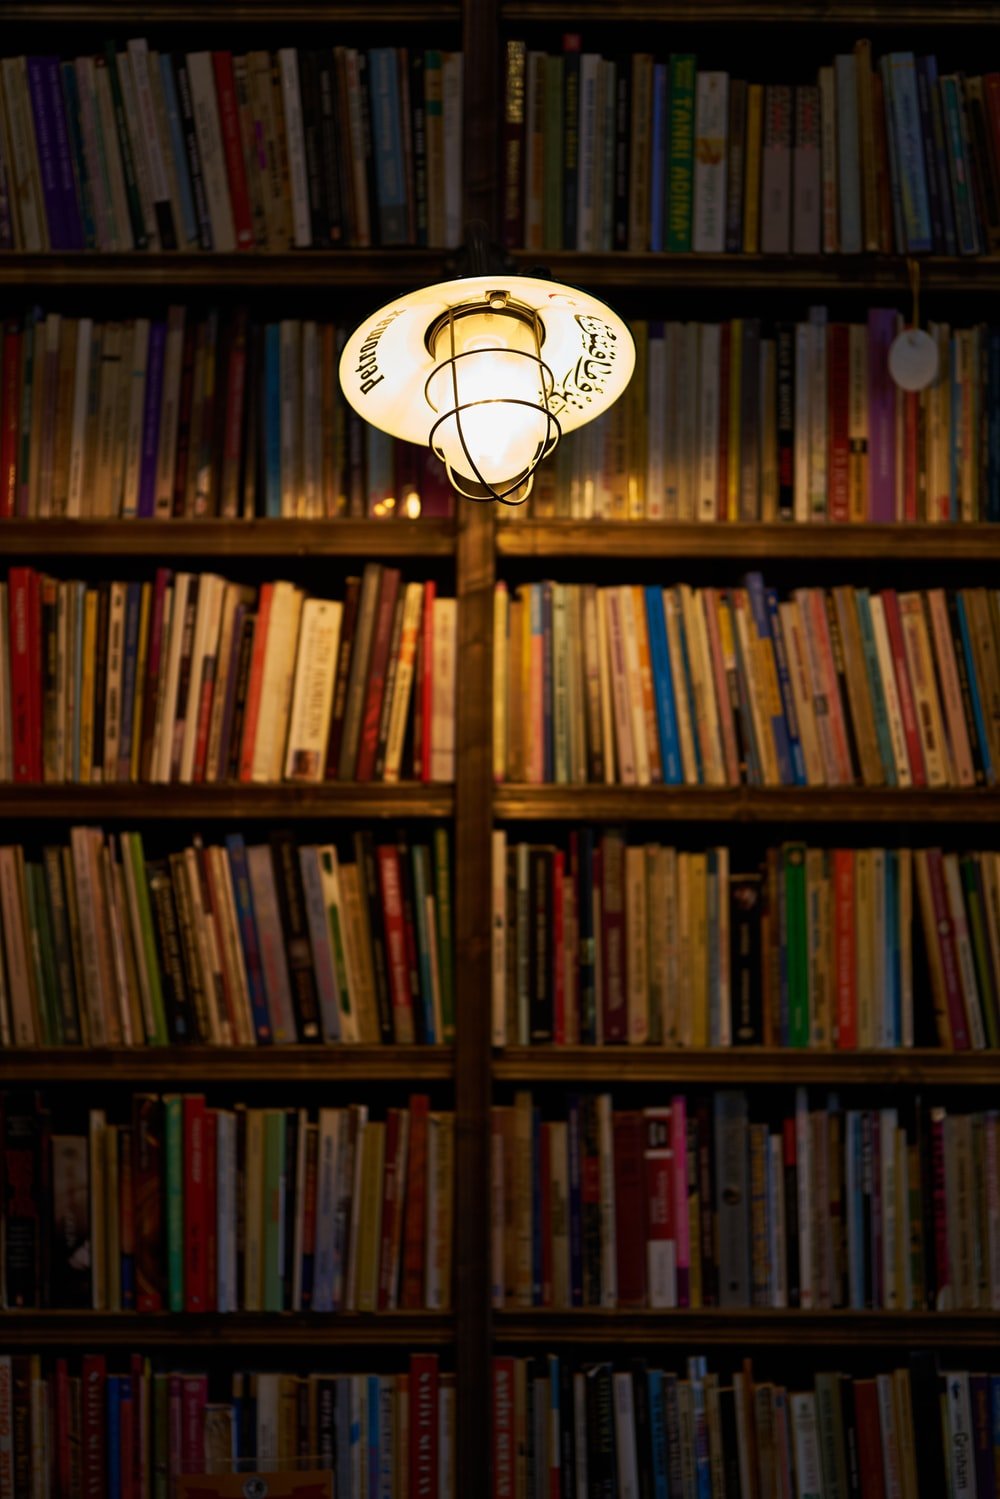 Dark Library Picture. Download Free Image